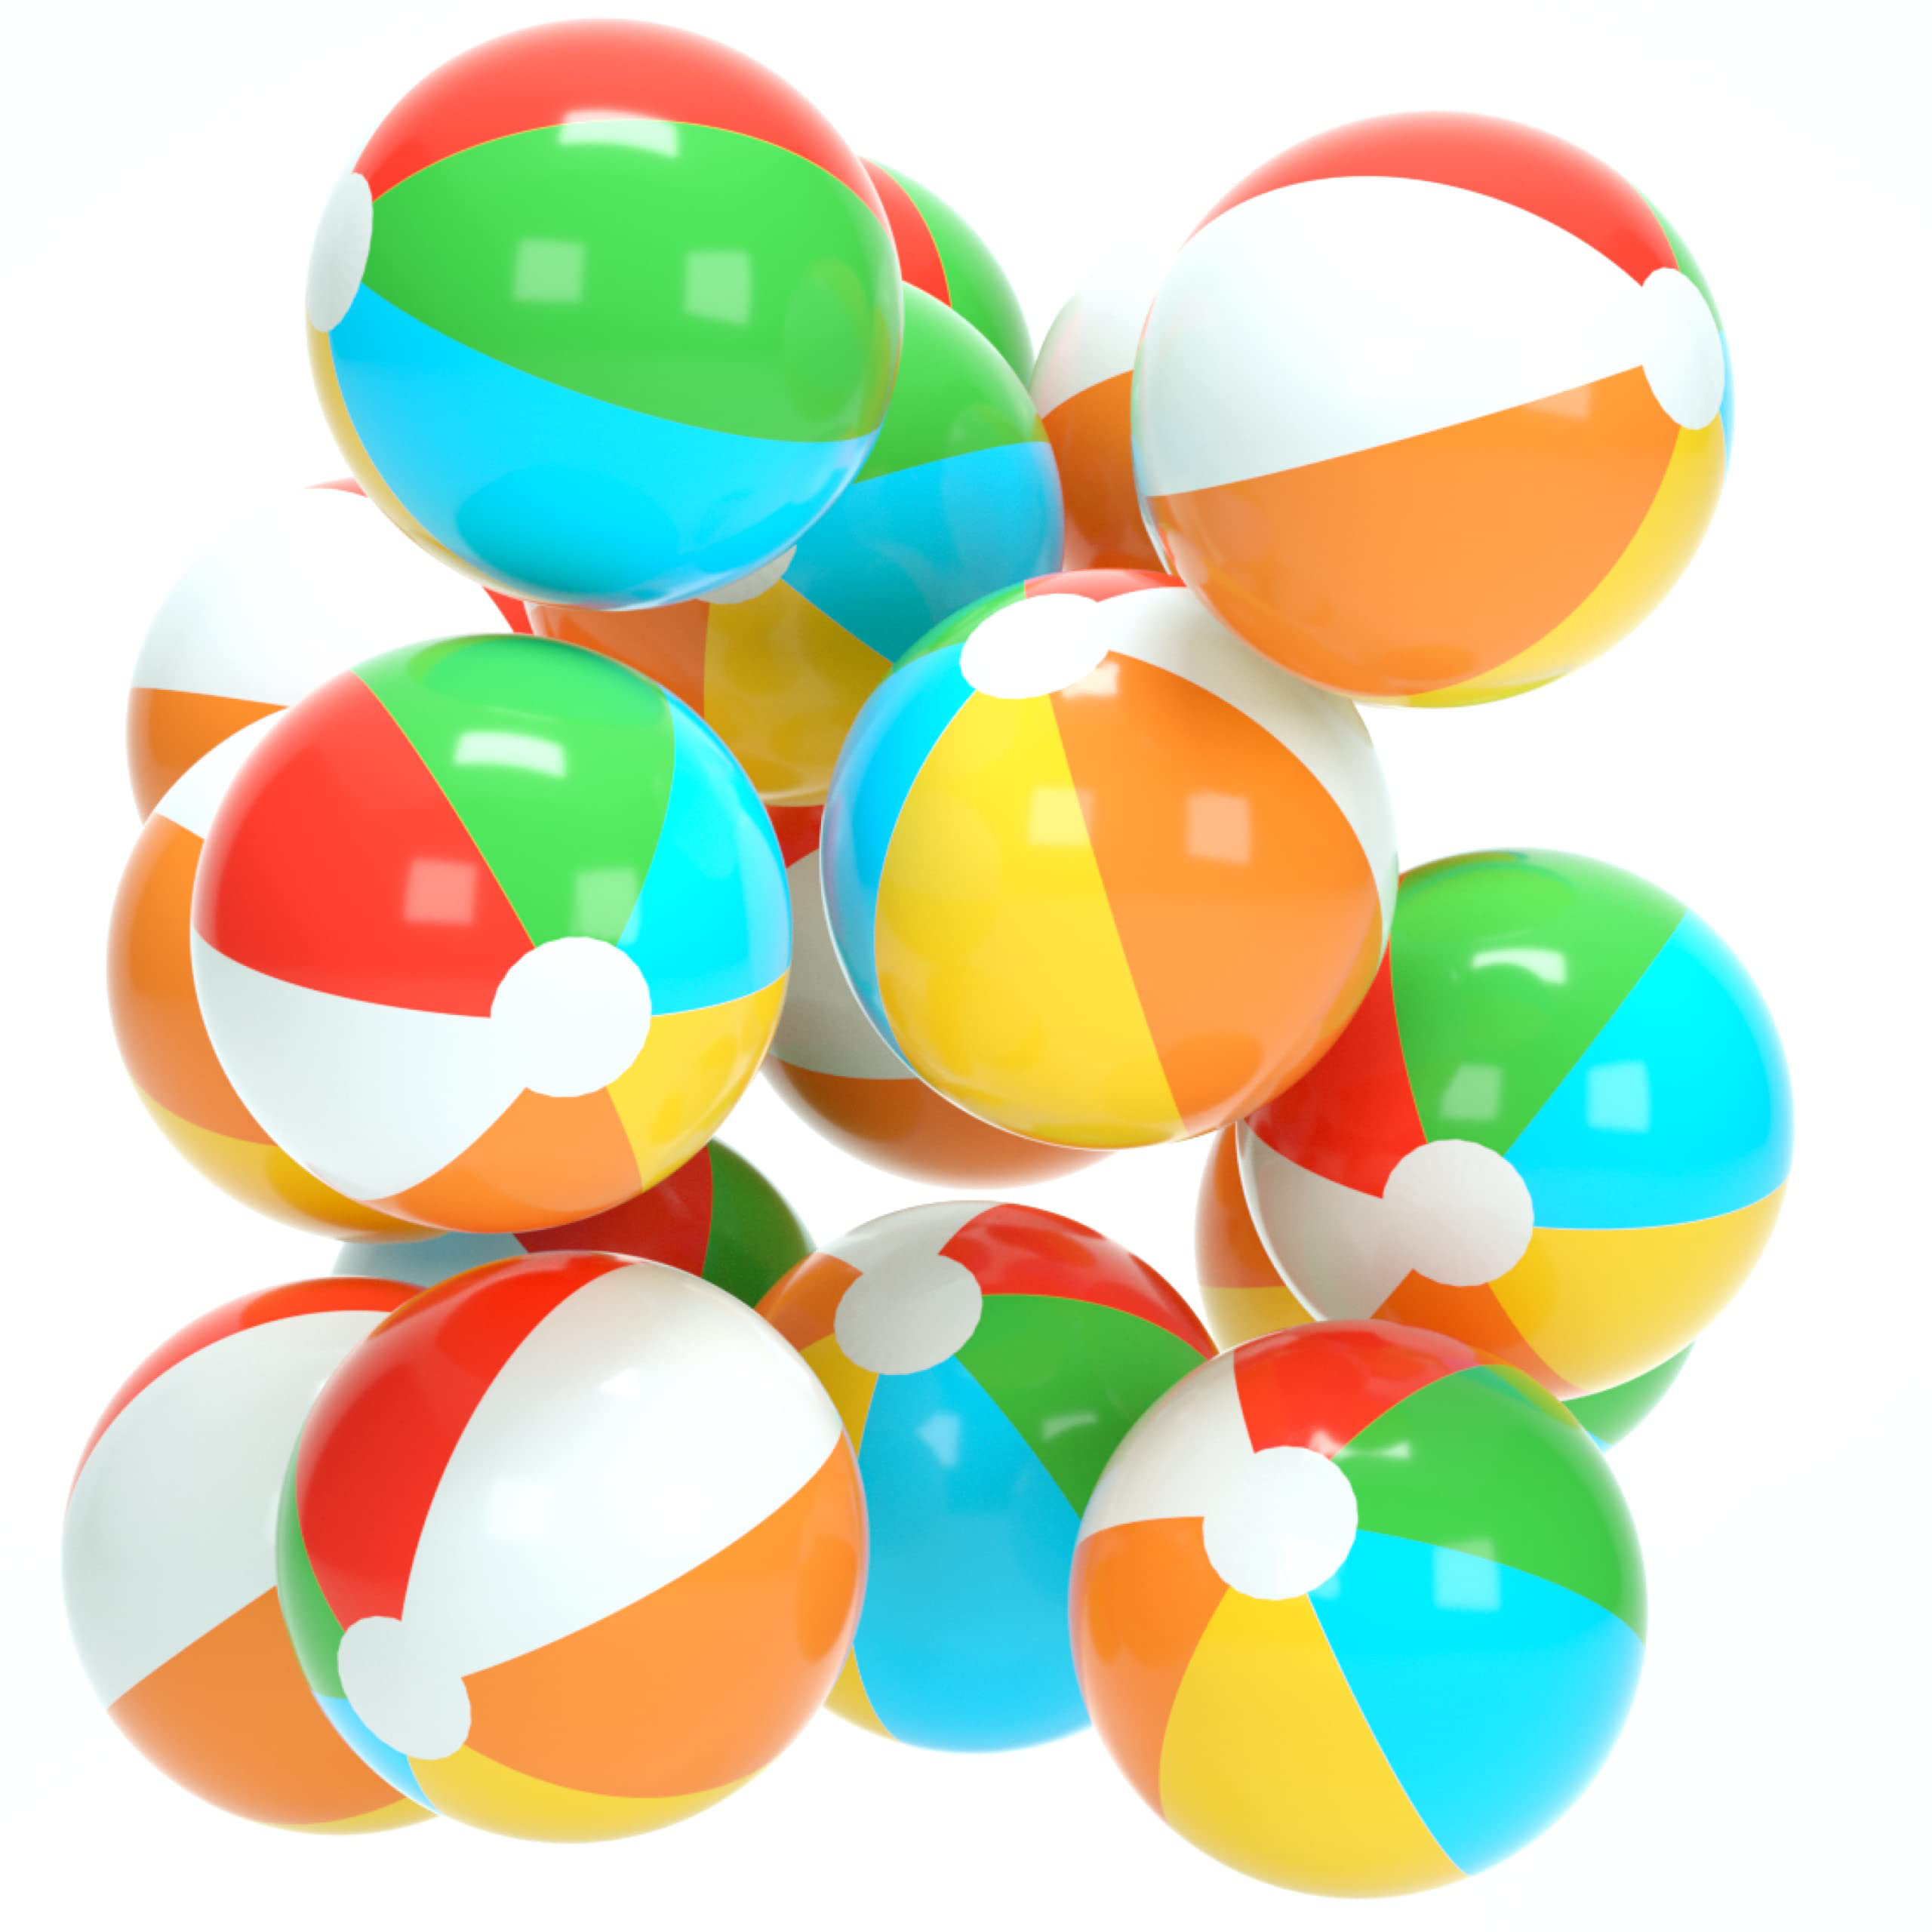 Wholesale Foam Ball Cannon Beach, Stress & Inflatable Toys